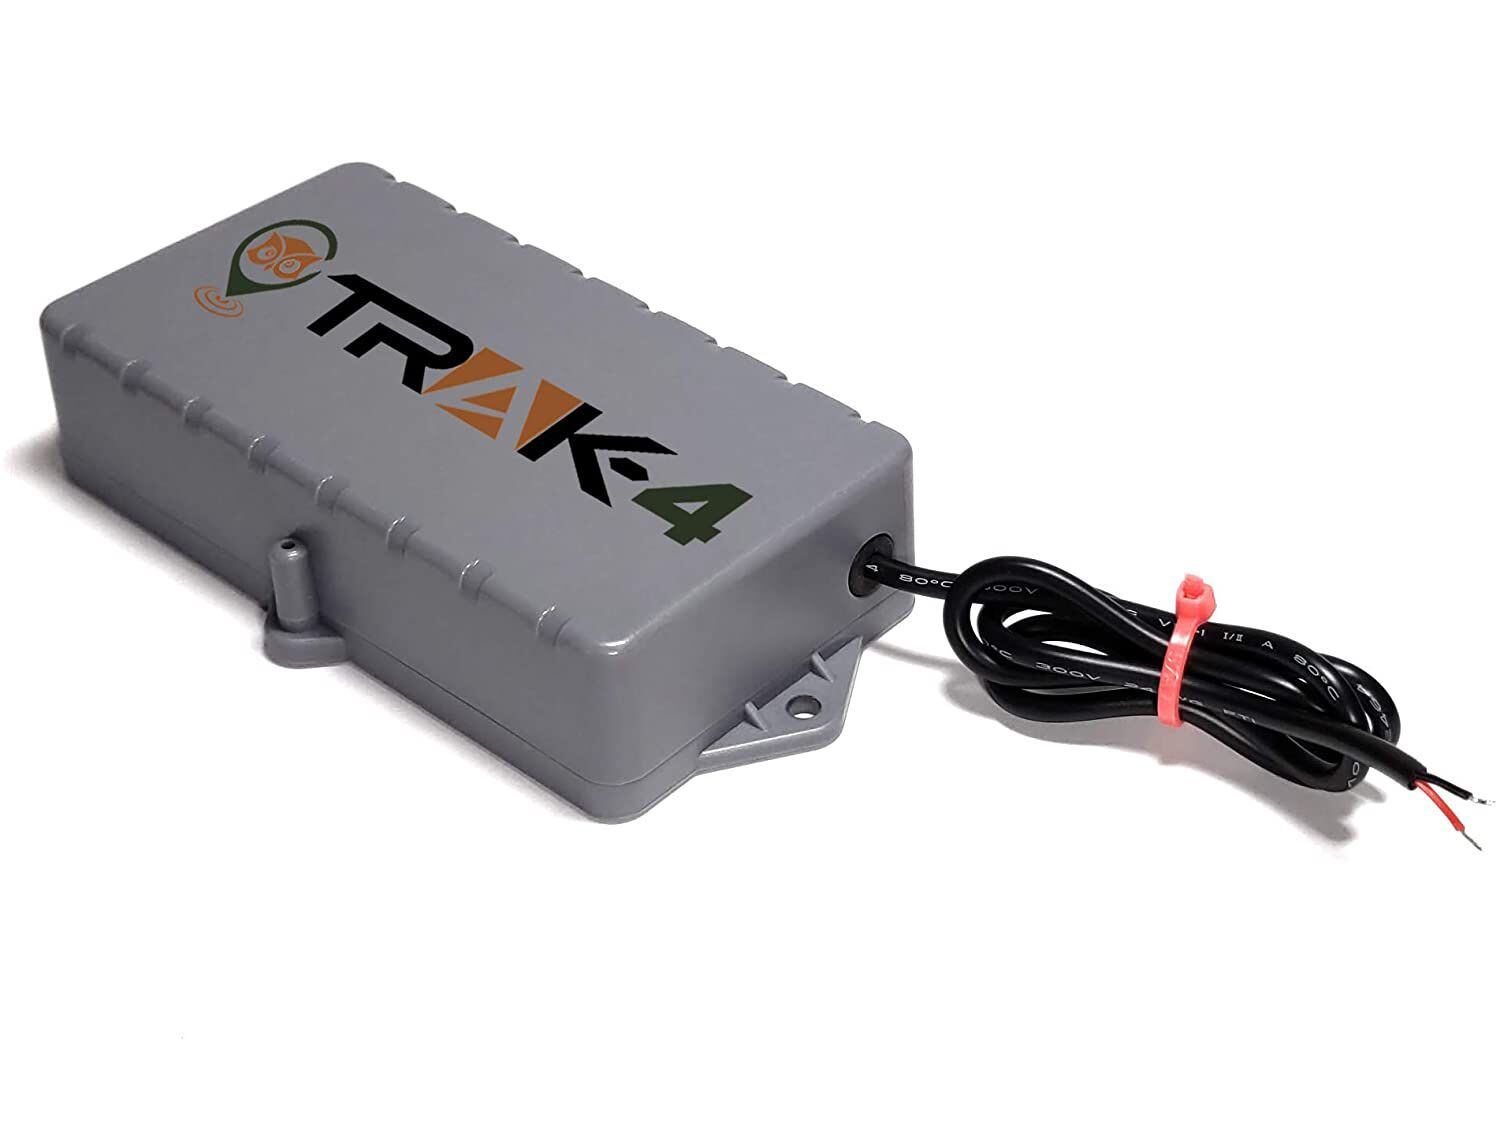 This small tracker tucks away nicely and wires into your vehicle’s battery to stay connected.